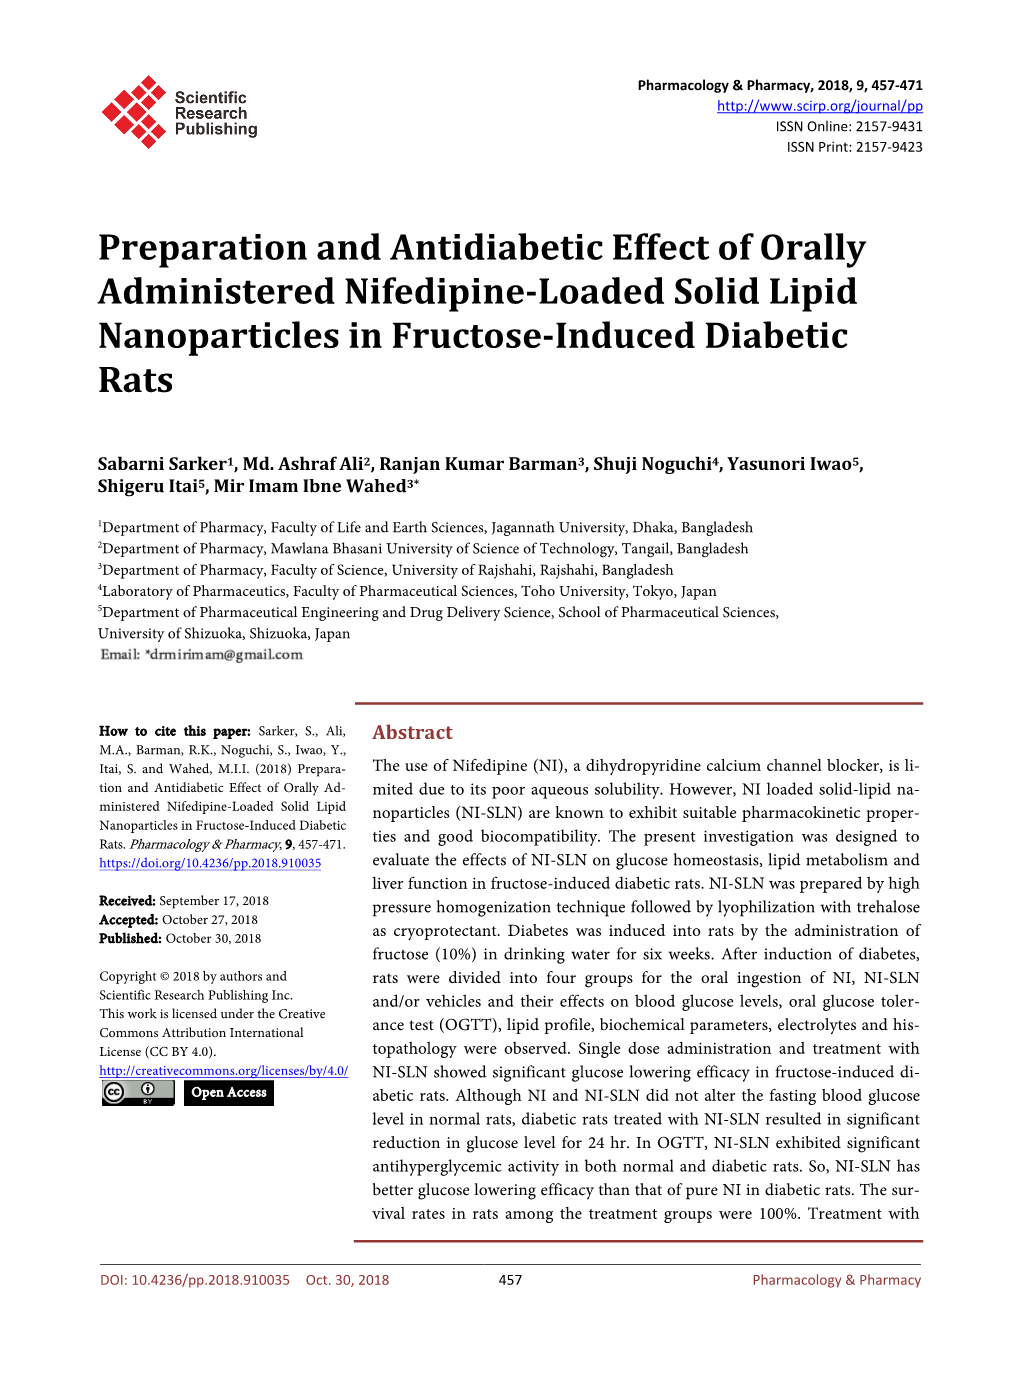 Preparation and Antidiabetic Effect of Orally Administered Nifedipine‐Loaded Solid Lipid Nanoparticles in Fructose-Induced Diabetic Rats